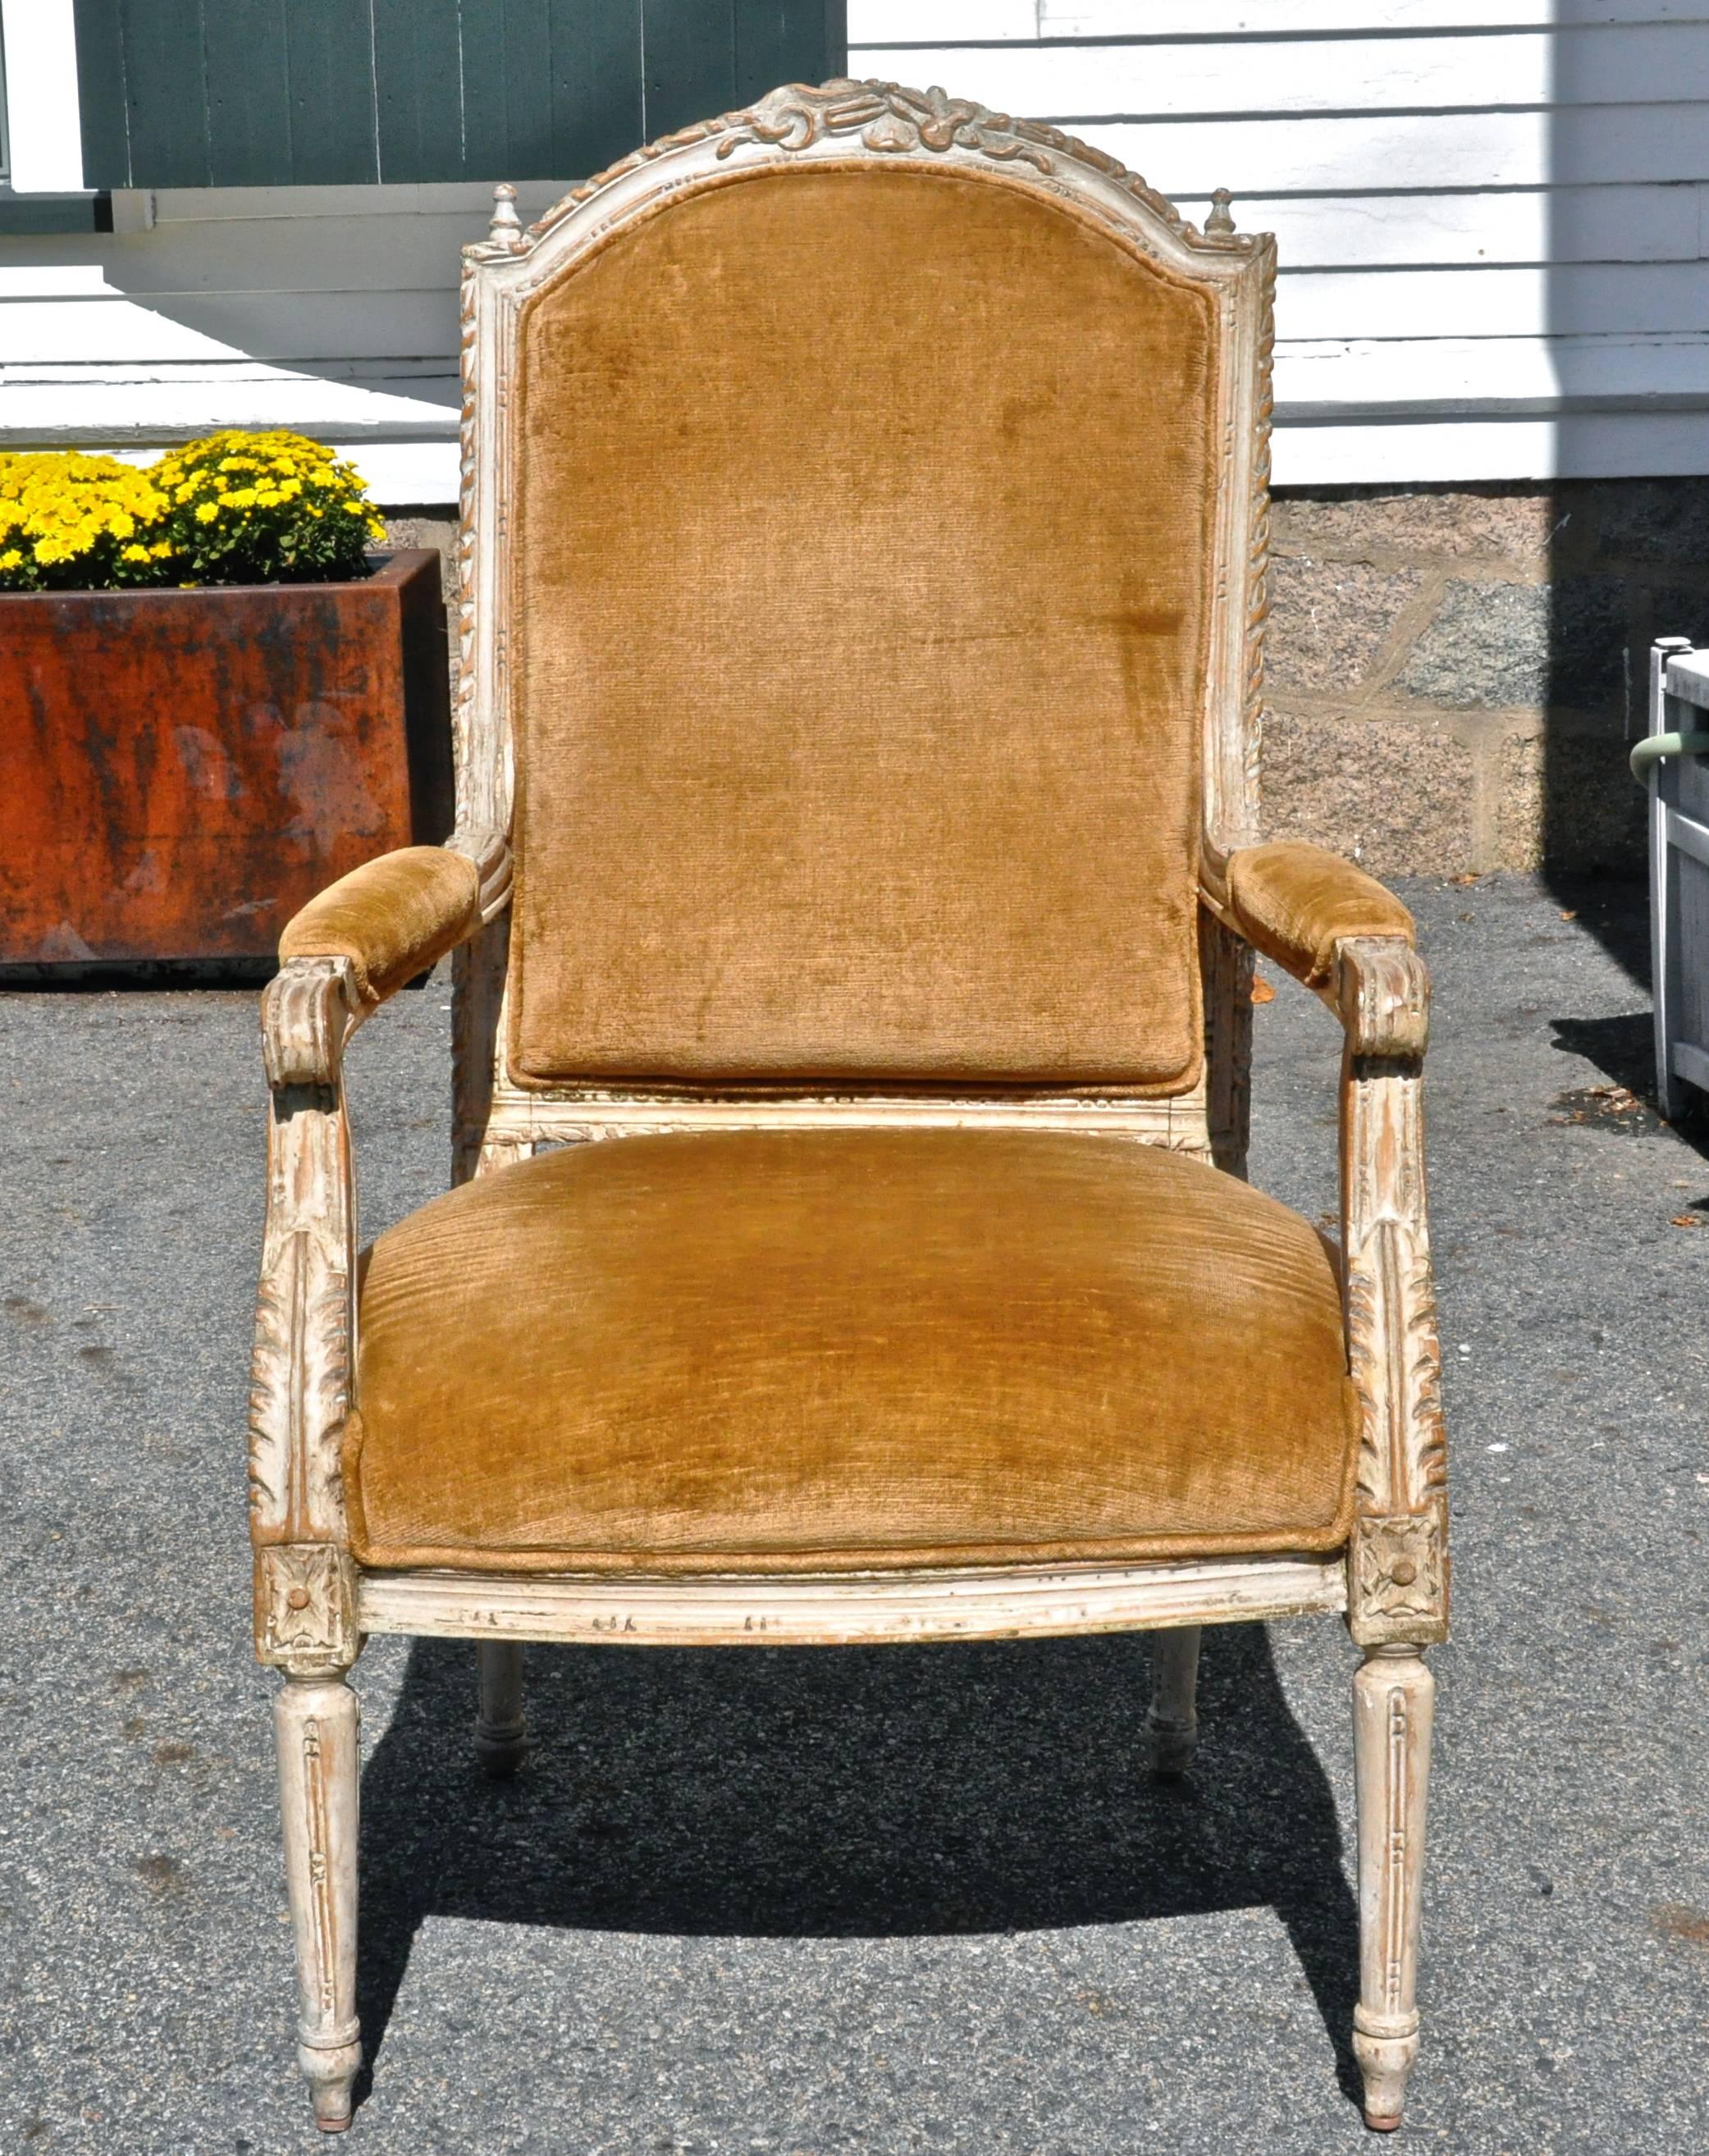 Two pairs of Italian painted and carved neoclassical armchairs.

Larger proportion.
Carved with stylized musical instruments to crest.
Paint original and beautifully worn.
Now is very usable golden brown mohair.

I will sell in pairs or all